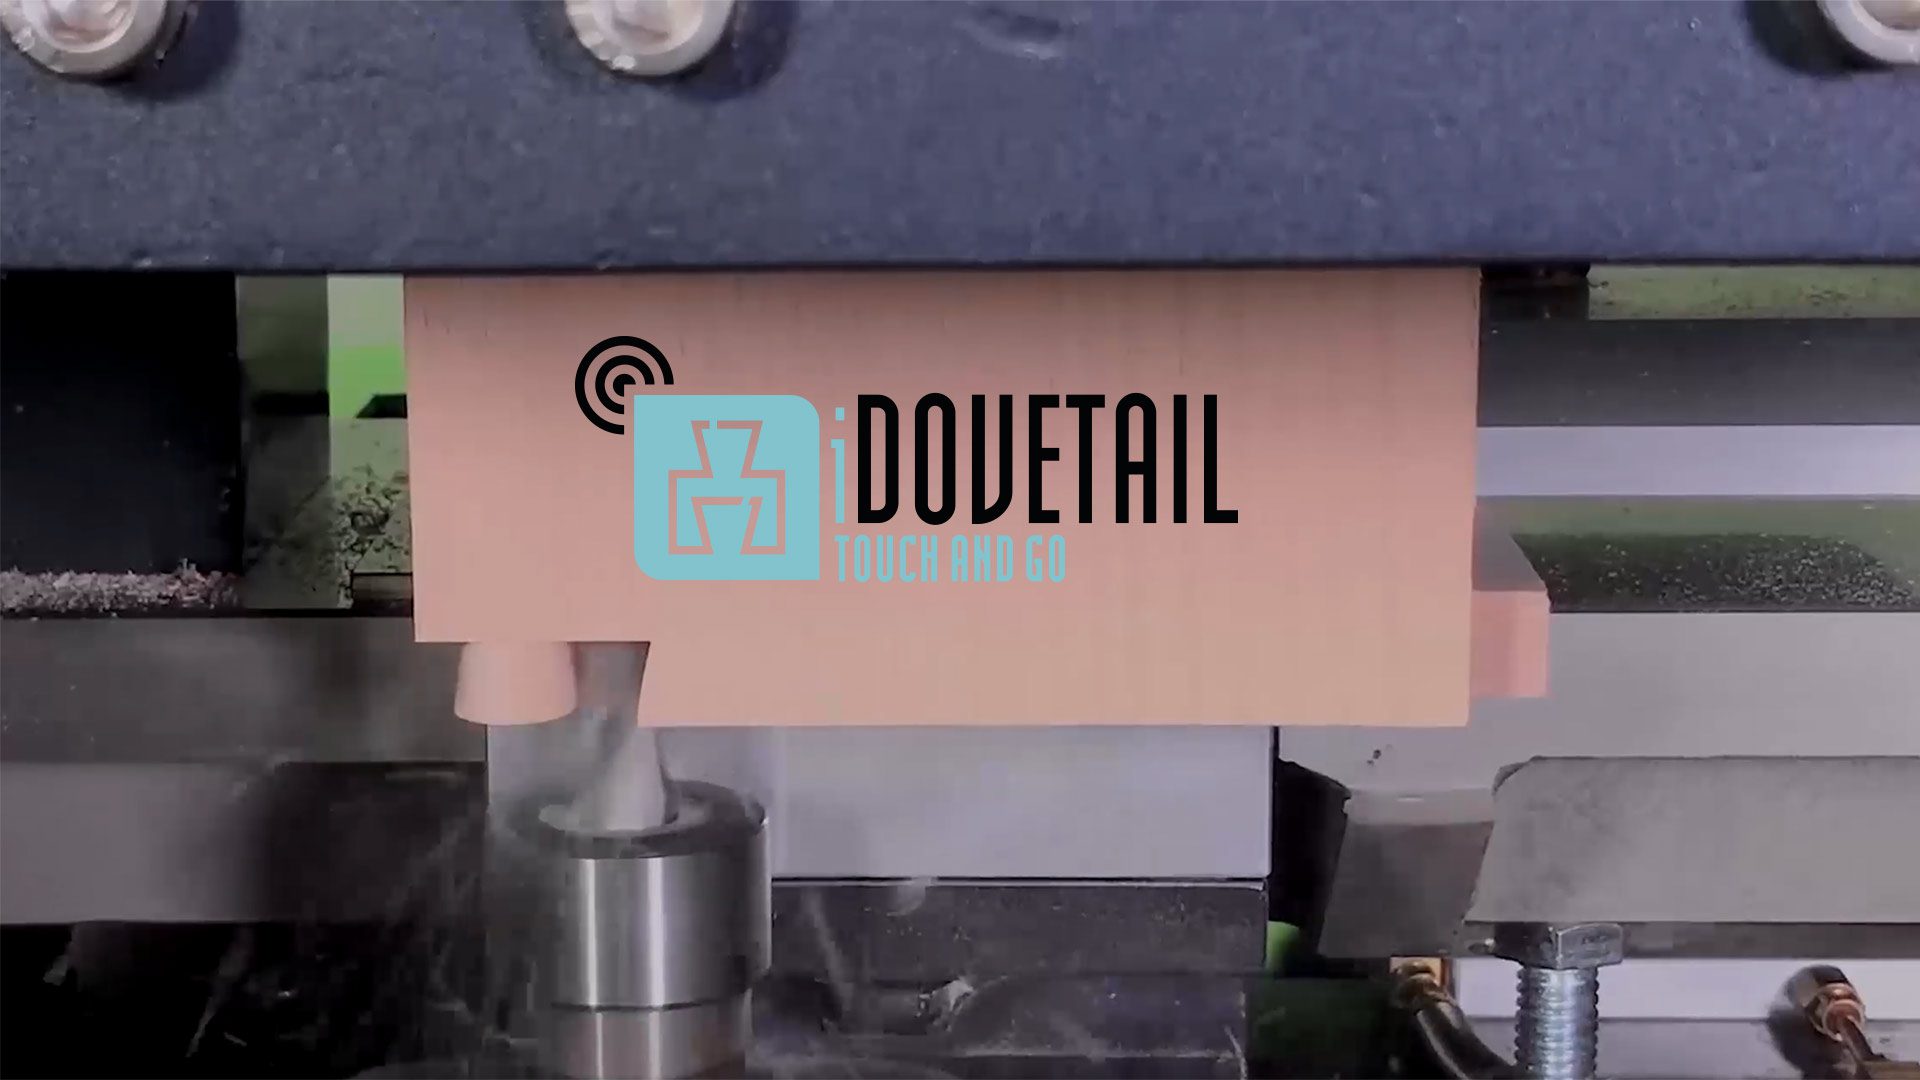 iDovetail - The most easy dovetail machine in the world